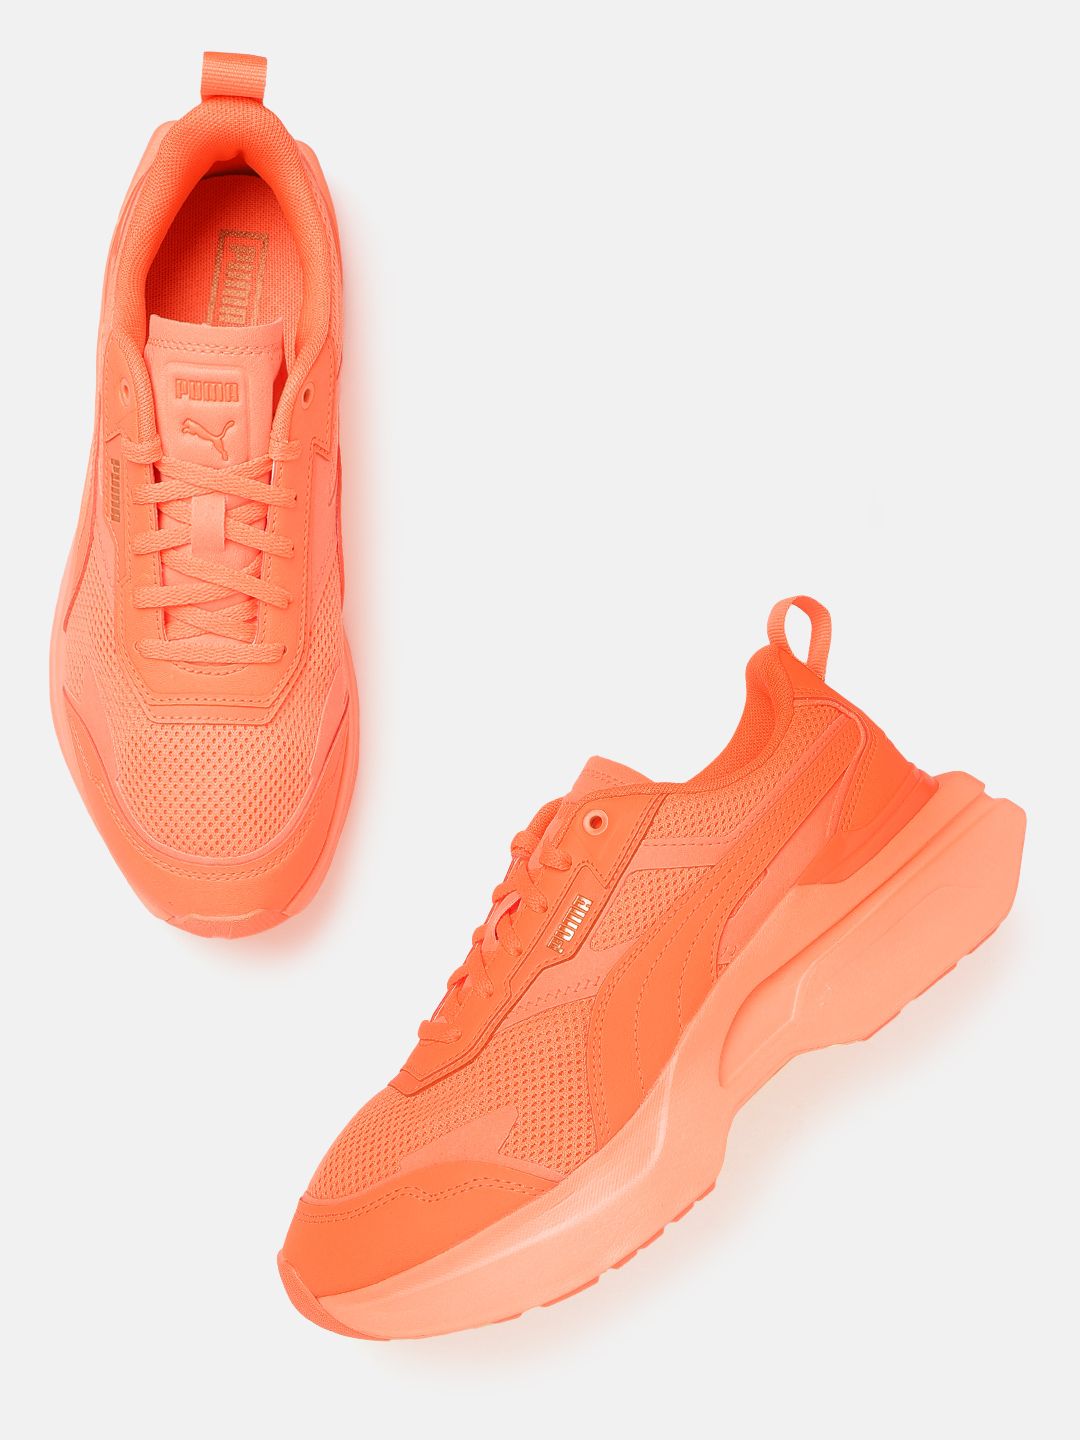 Puma Women Orange Woven Design Leather Sneakers Excluding Trims Price in India